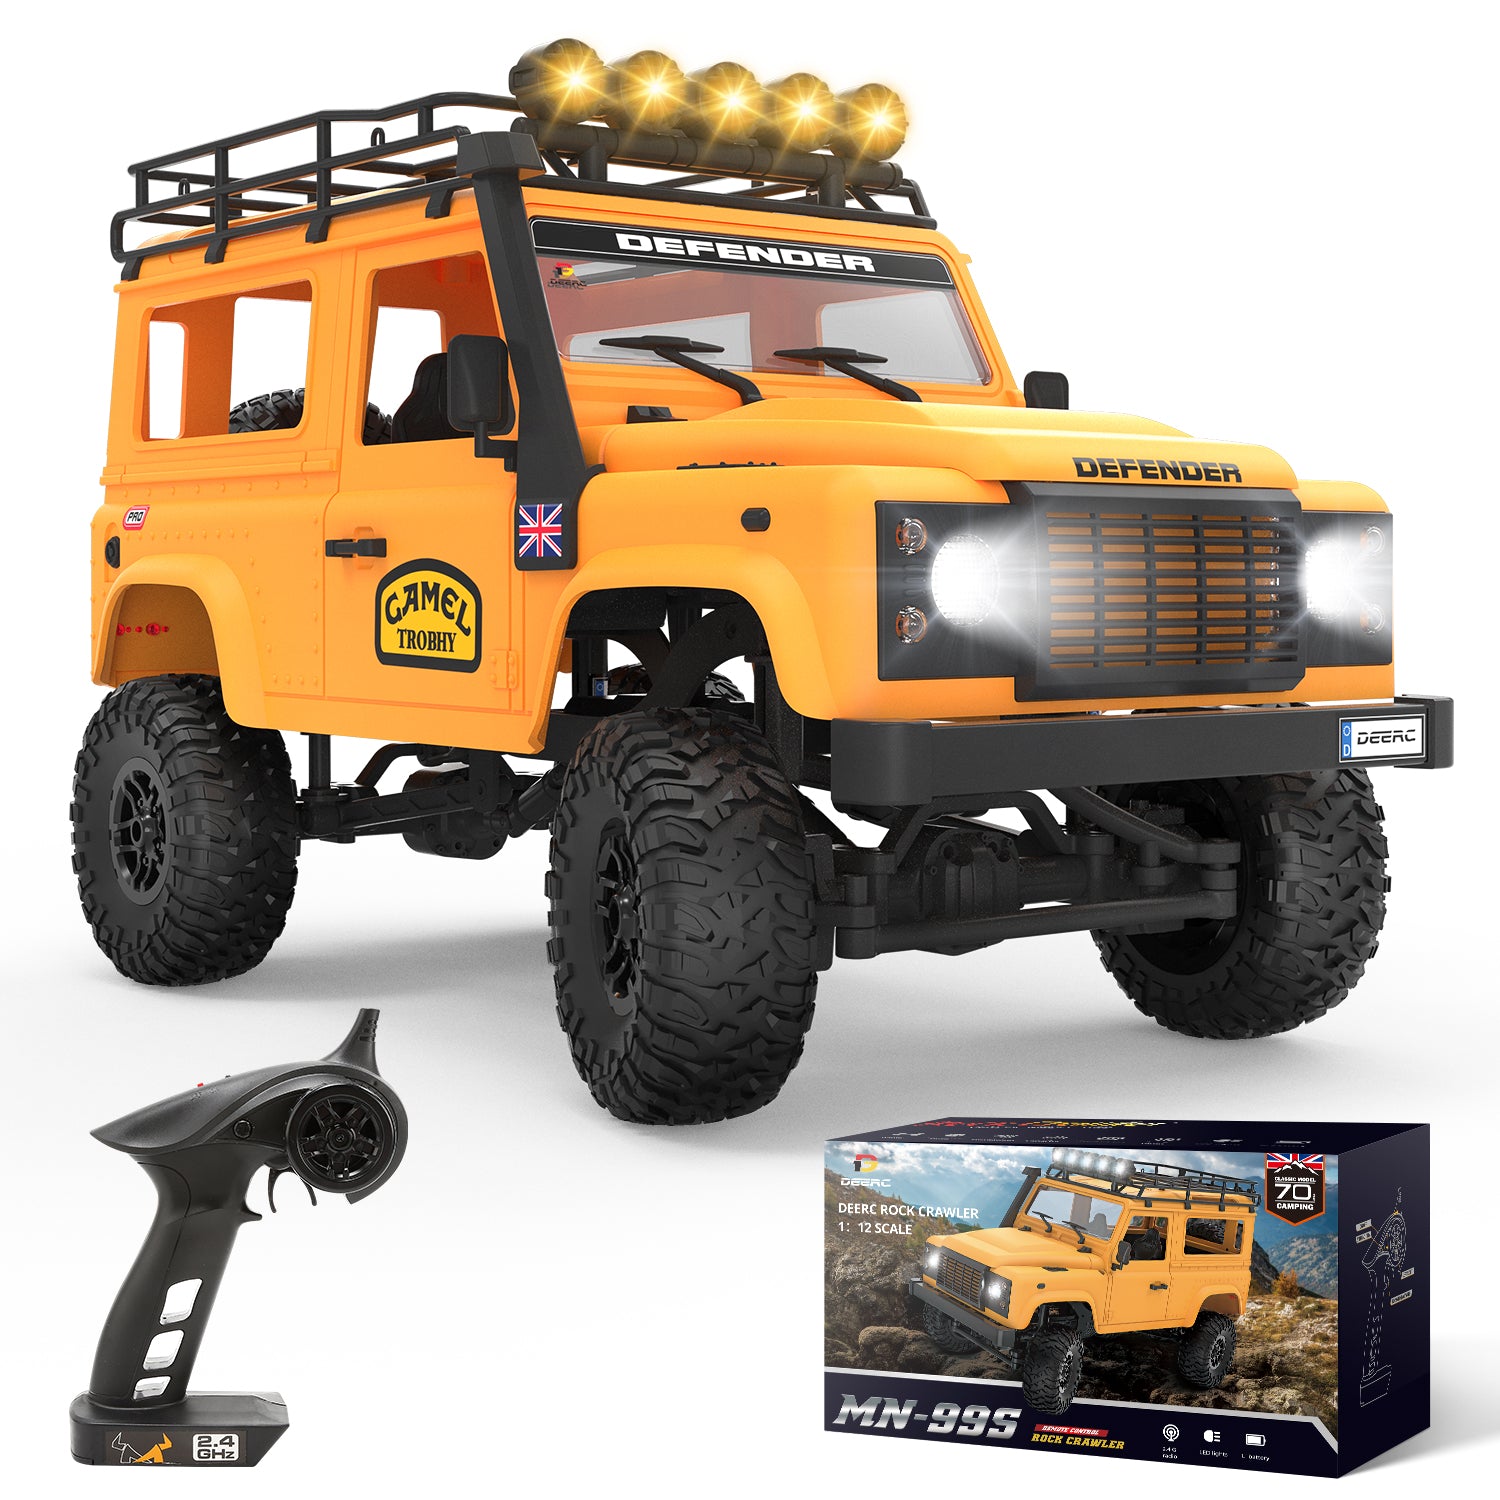 DEERC 1:12 RC Cars, 4x4 Rock Crawler, Off-Road Remote Control Truck W/LED Light System, 100 Min Play, 2.4Ghz All Terrain RTR Electric Vehicle Toy